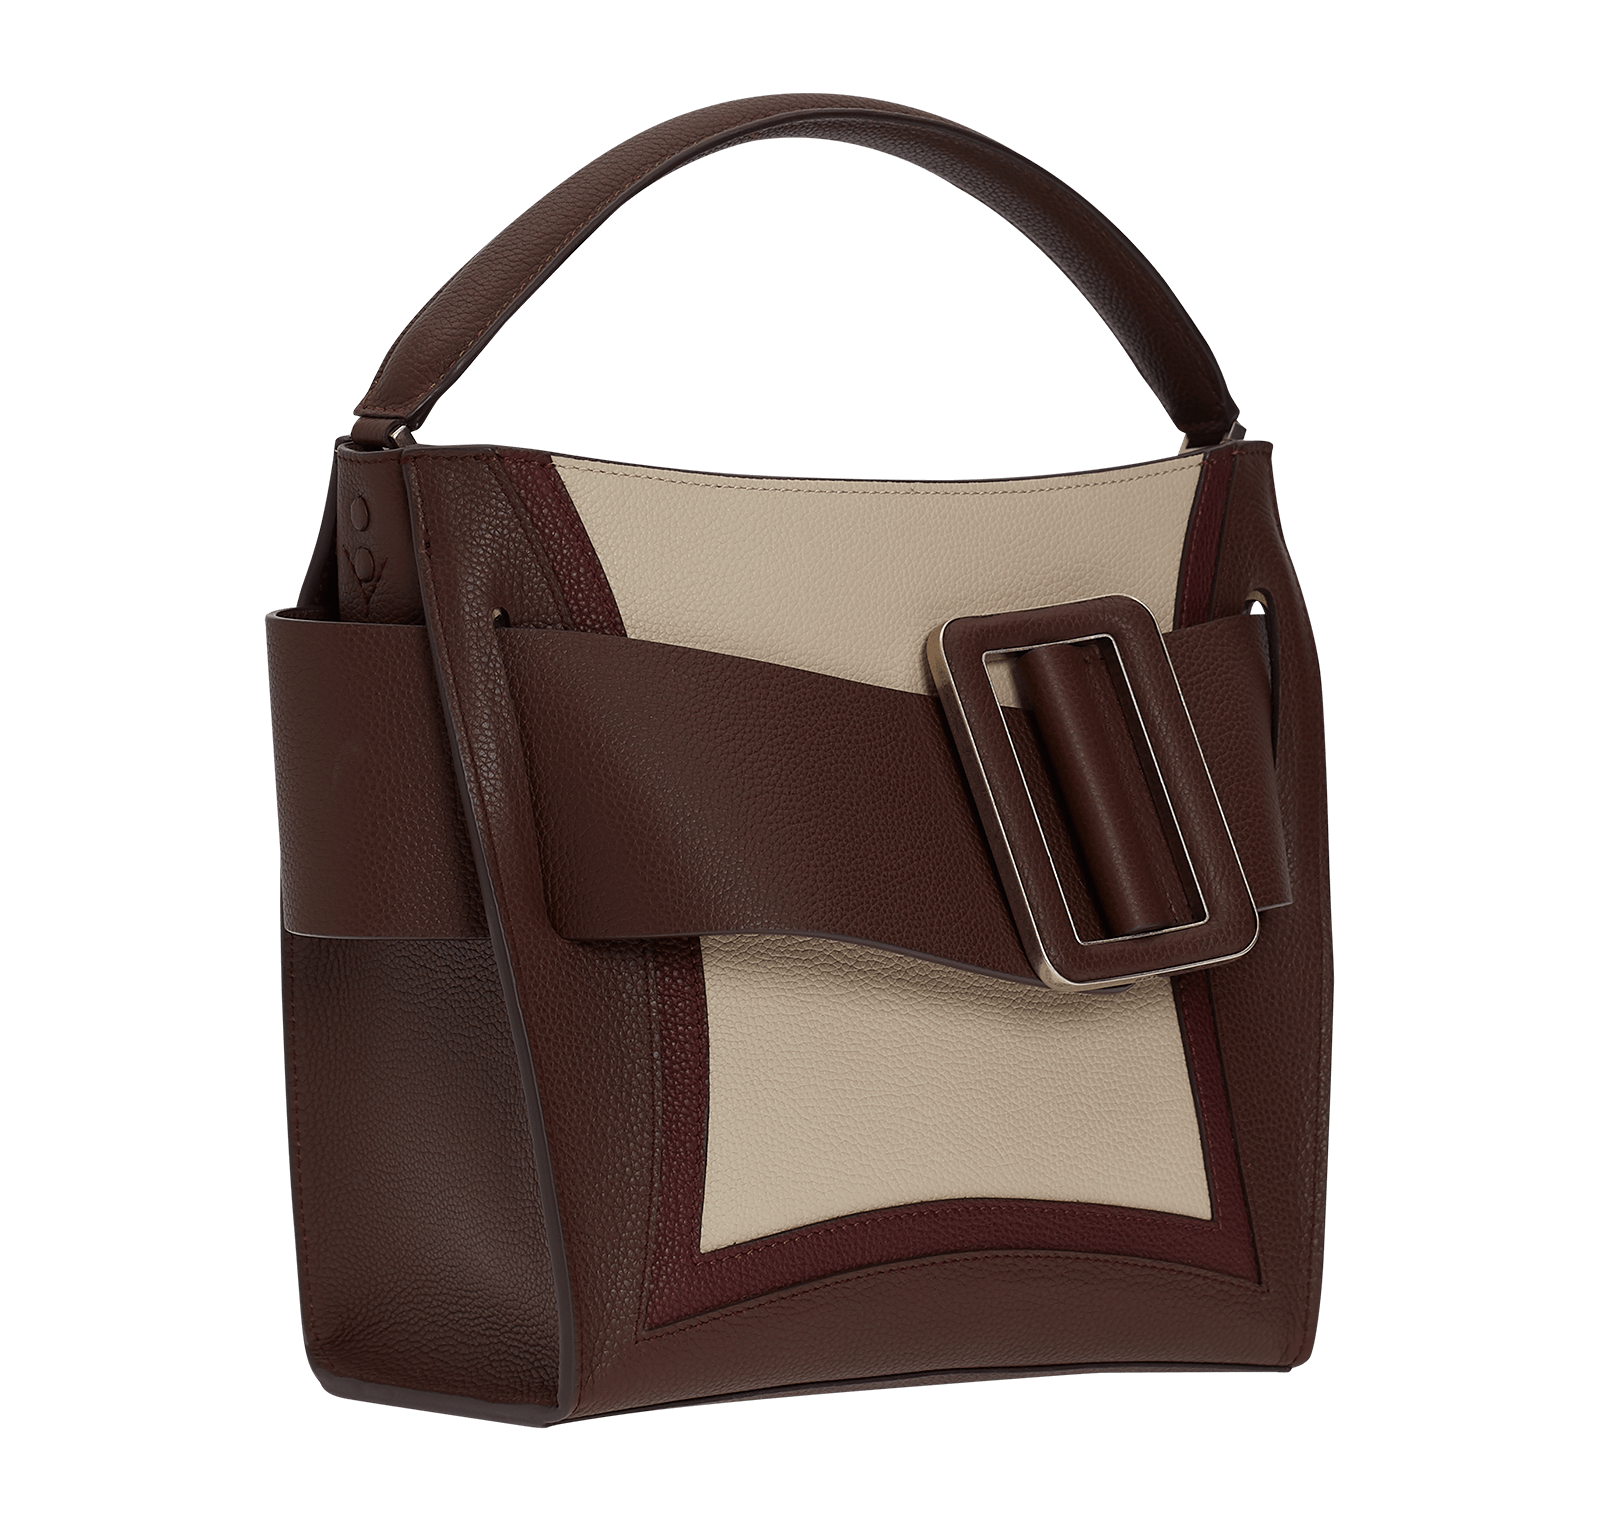 Open, soft natural grain leather handbag with a single carry handle, oversized front buckle detail and top zip fastener.